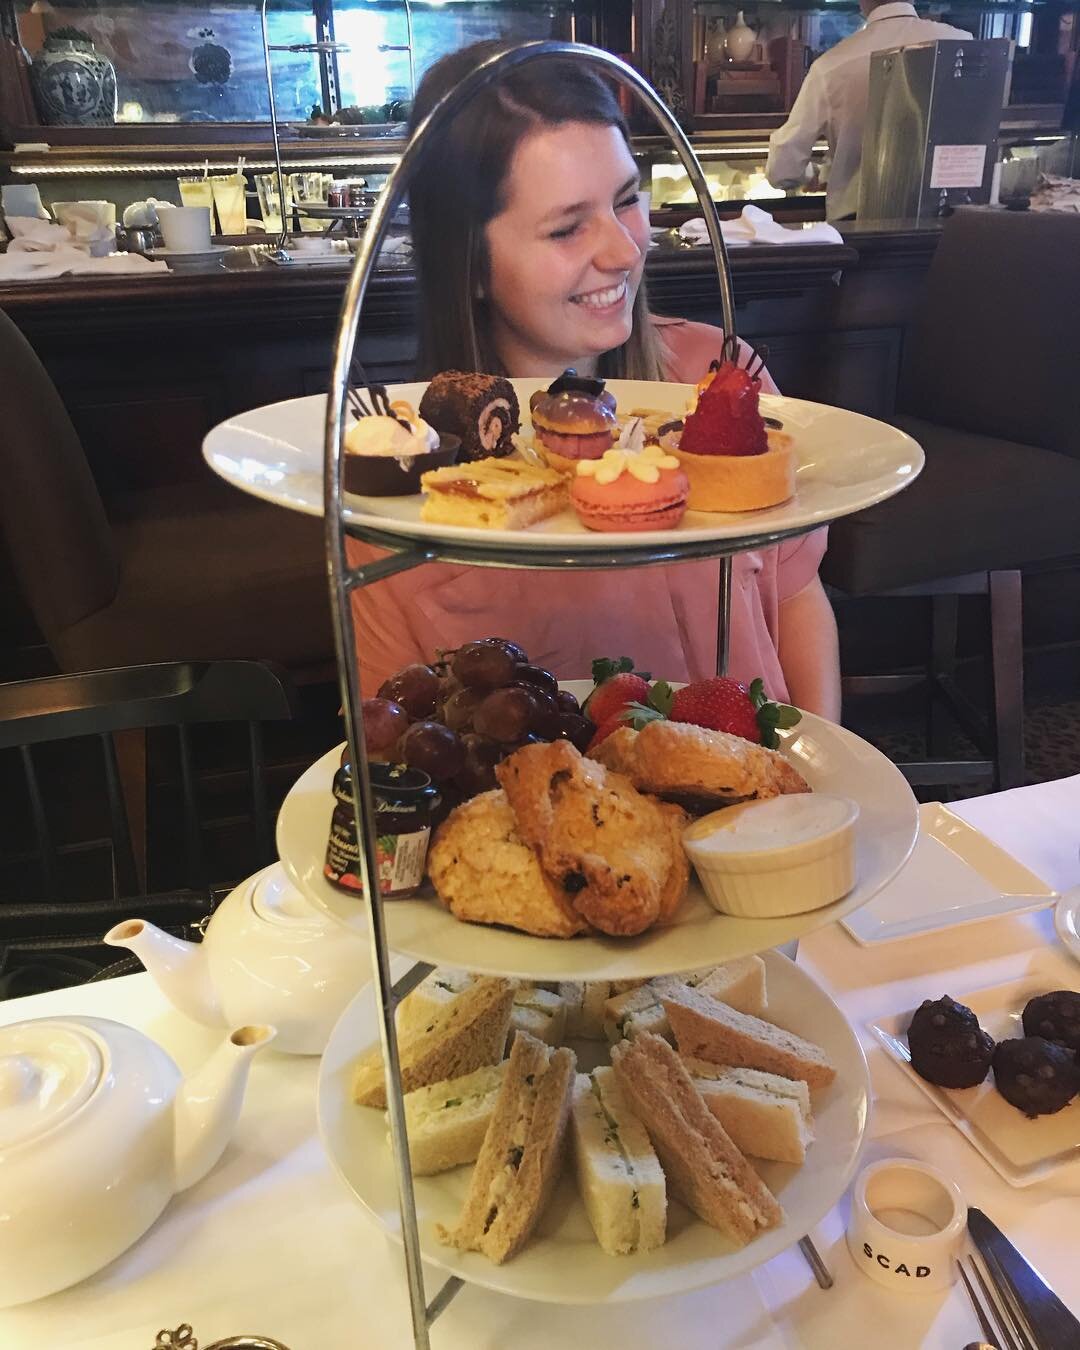 High tea with this beauty! Also pictured, Darce.